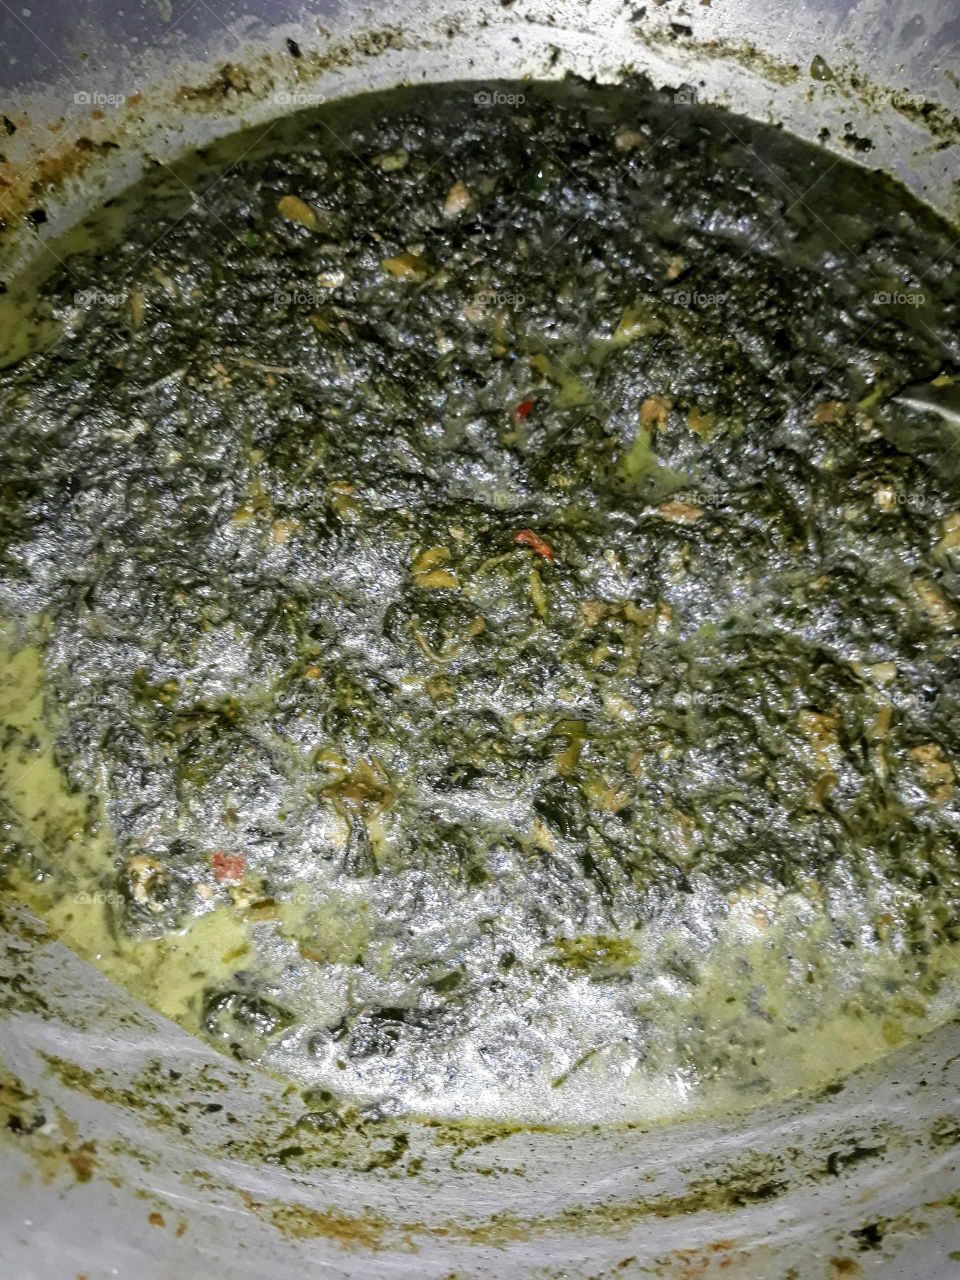 Cooking Laing, a Filipino hot and spicy dish made of dried taro leaves cooked in coconut milk.